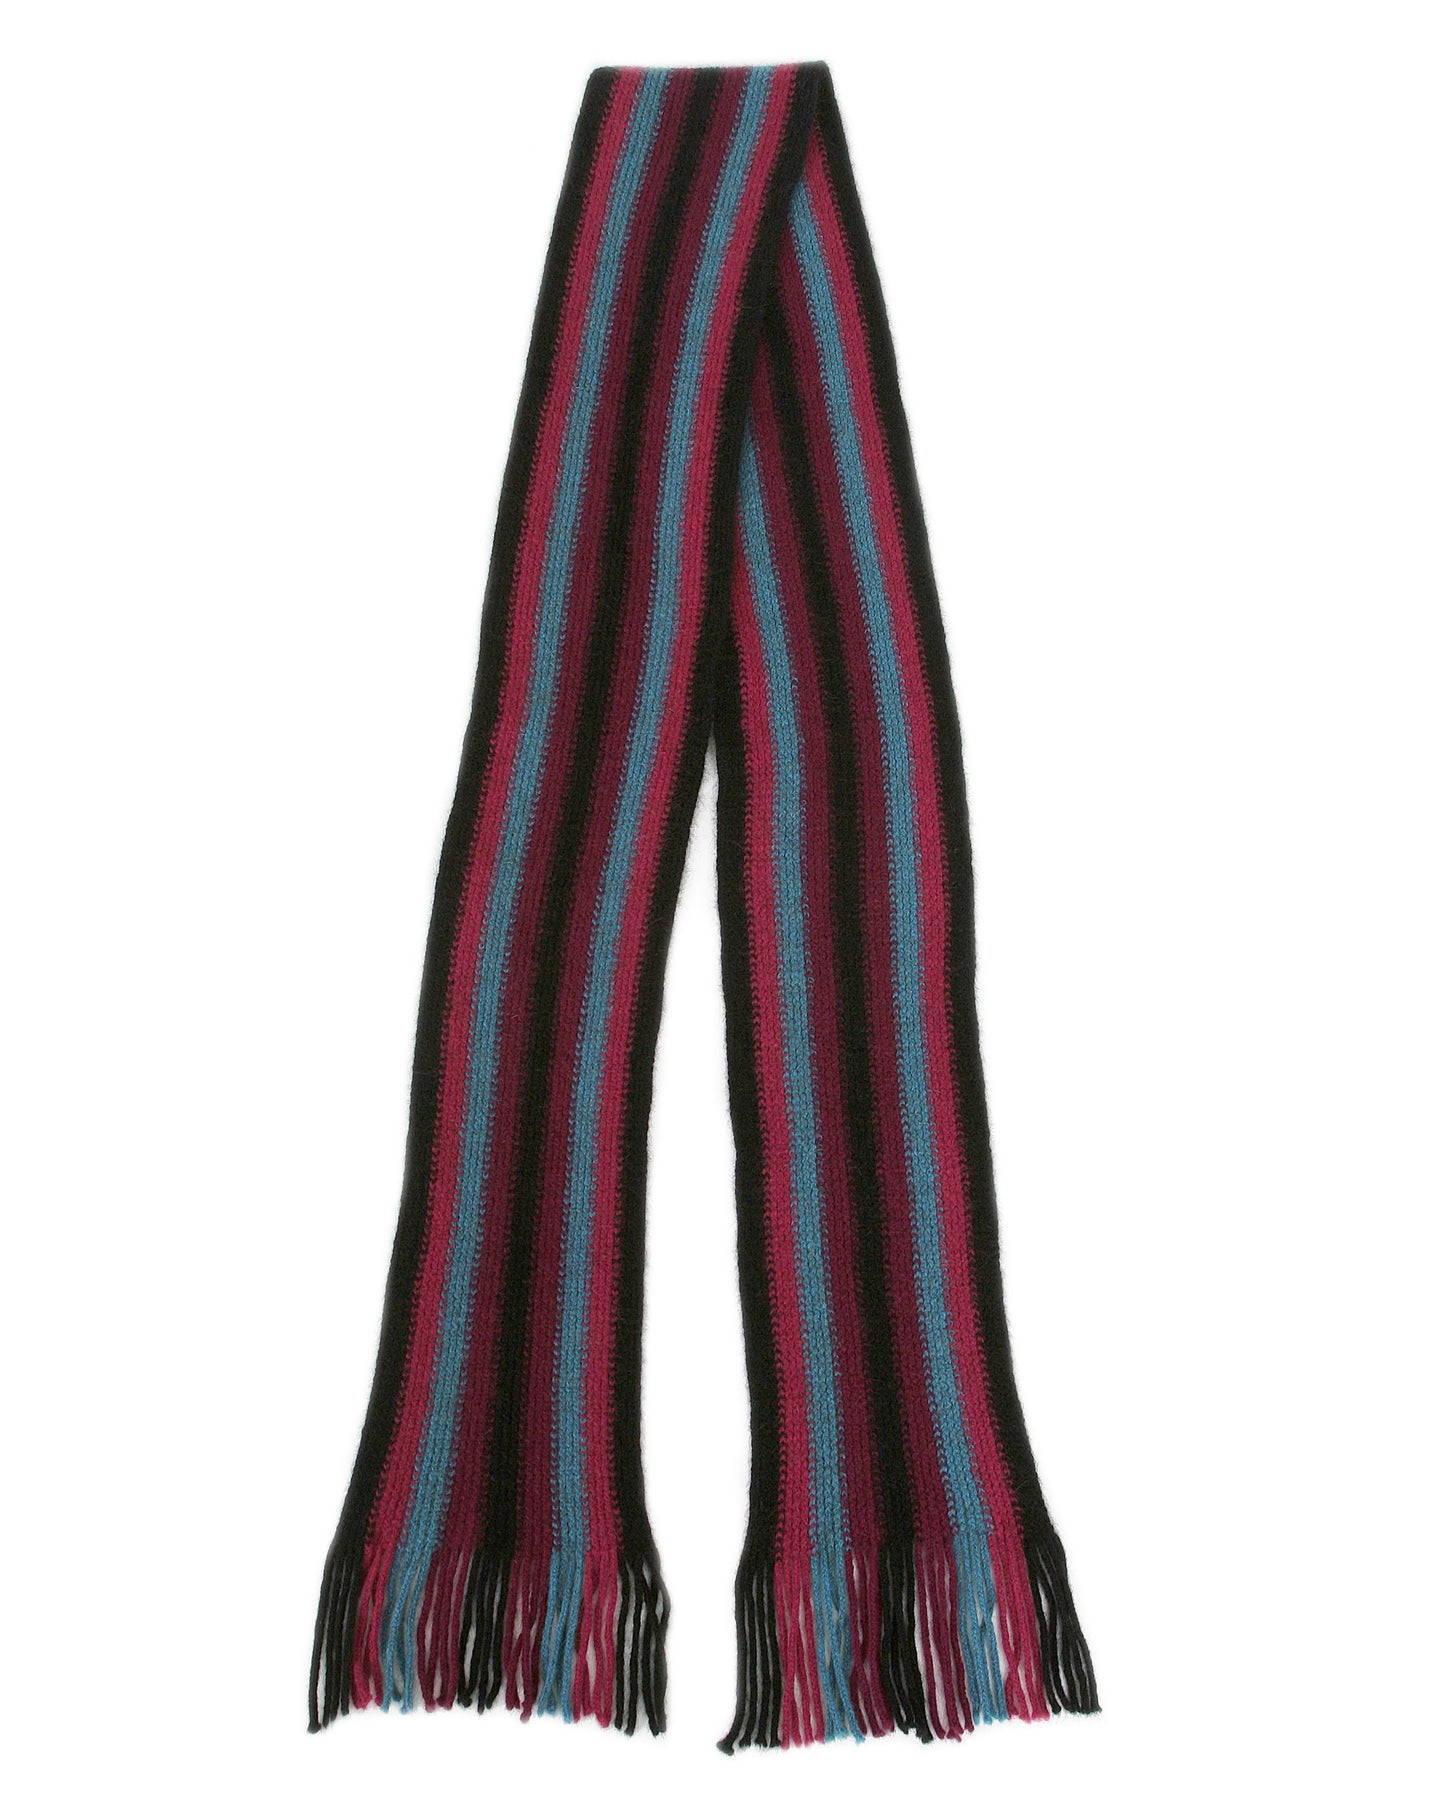 LONG VERTICAL STRIPED SCARF - Woolshed Gallery